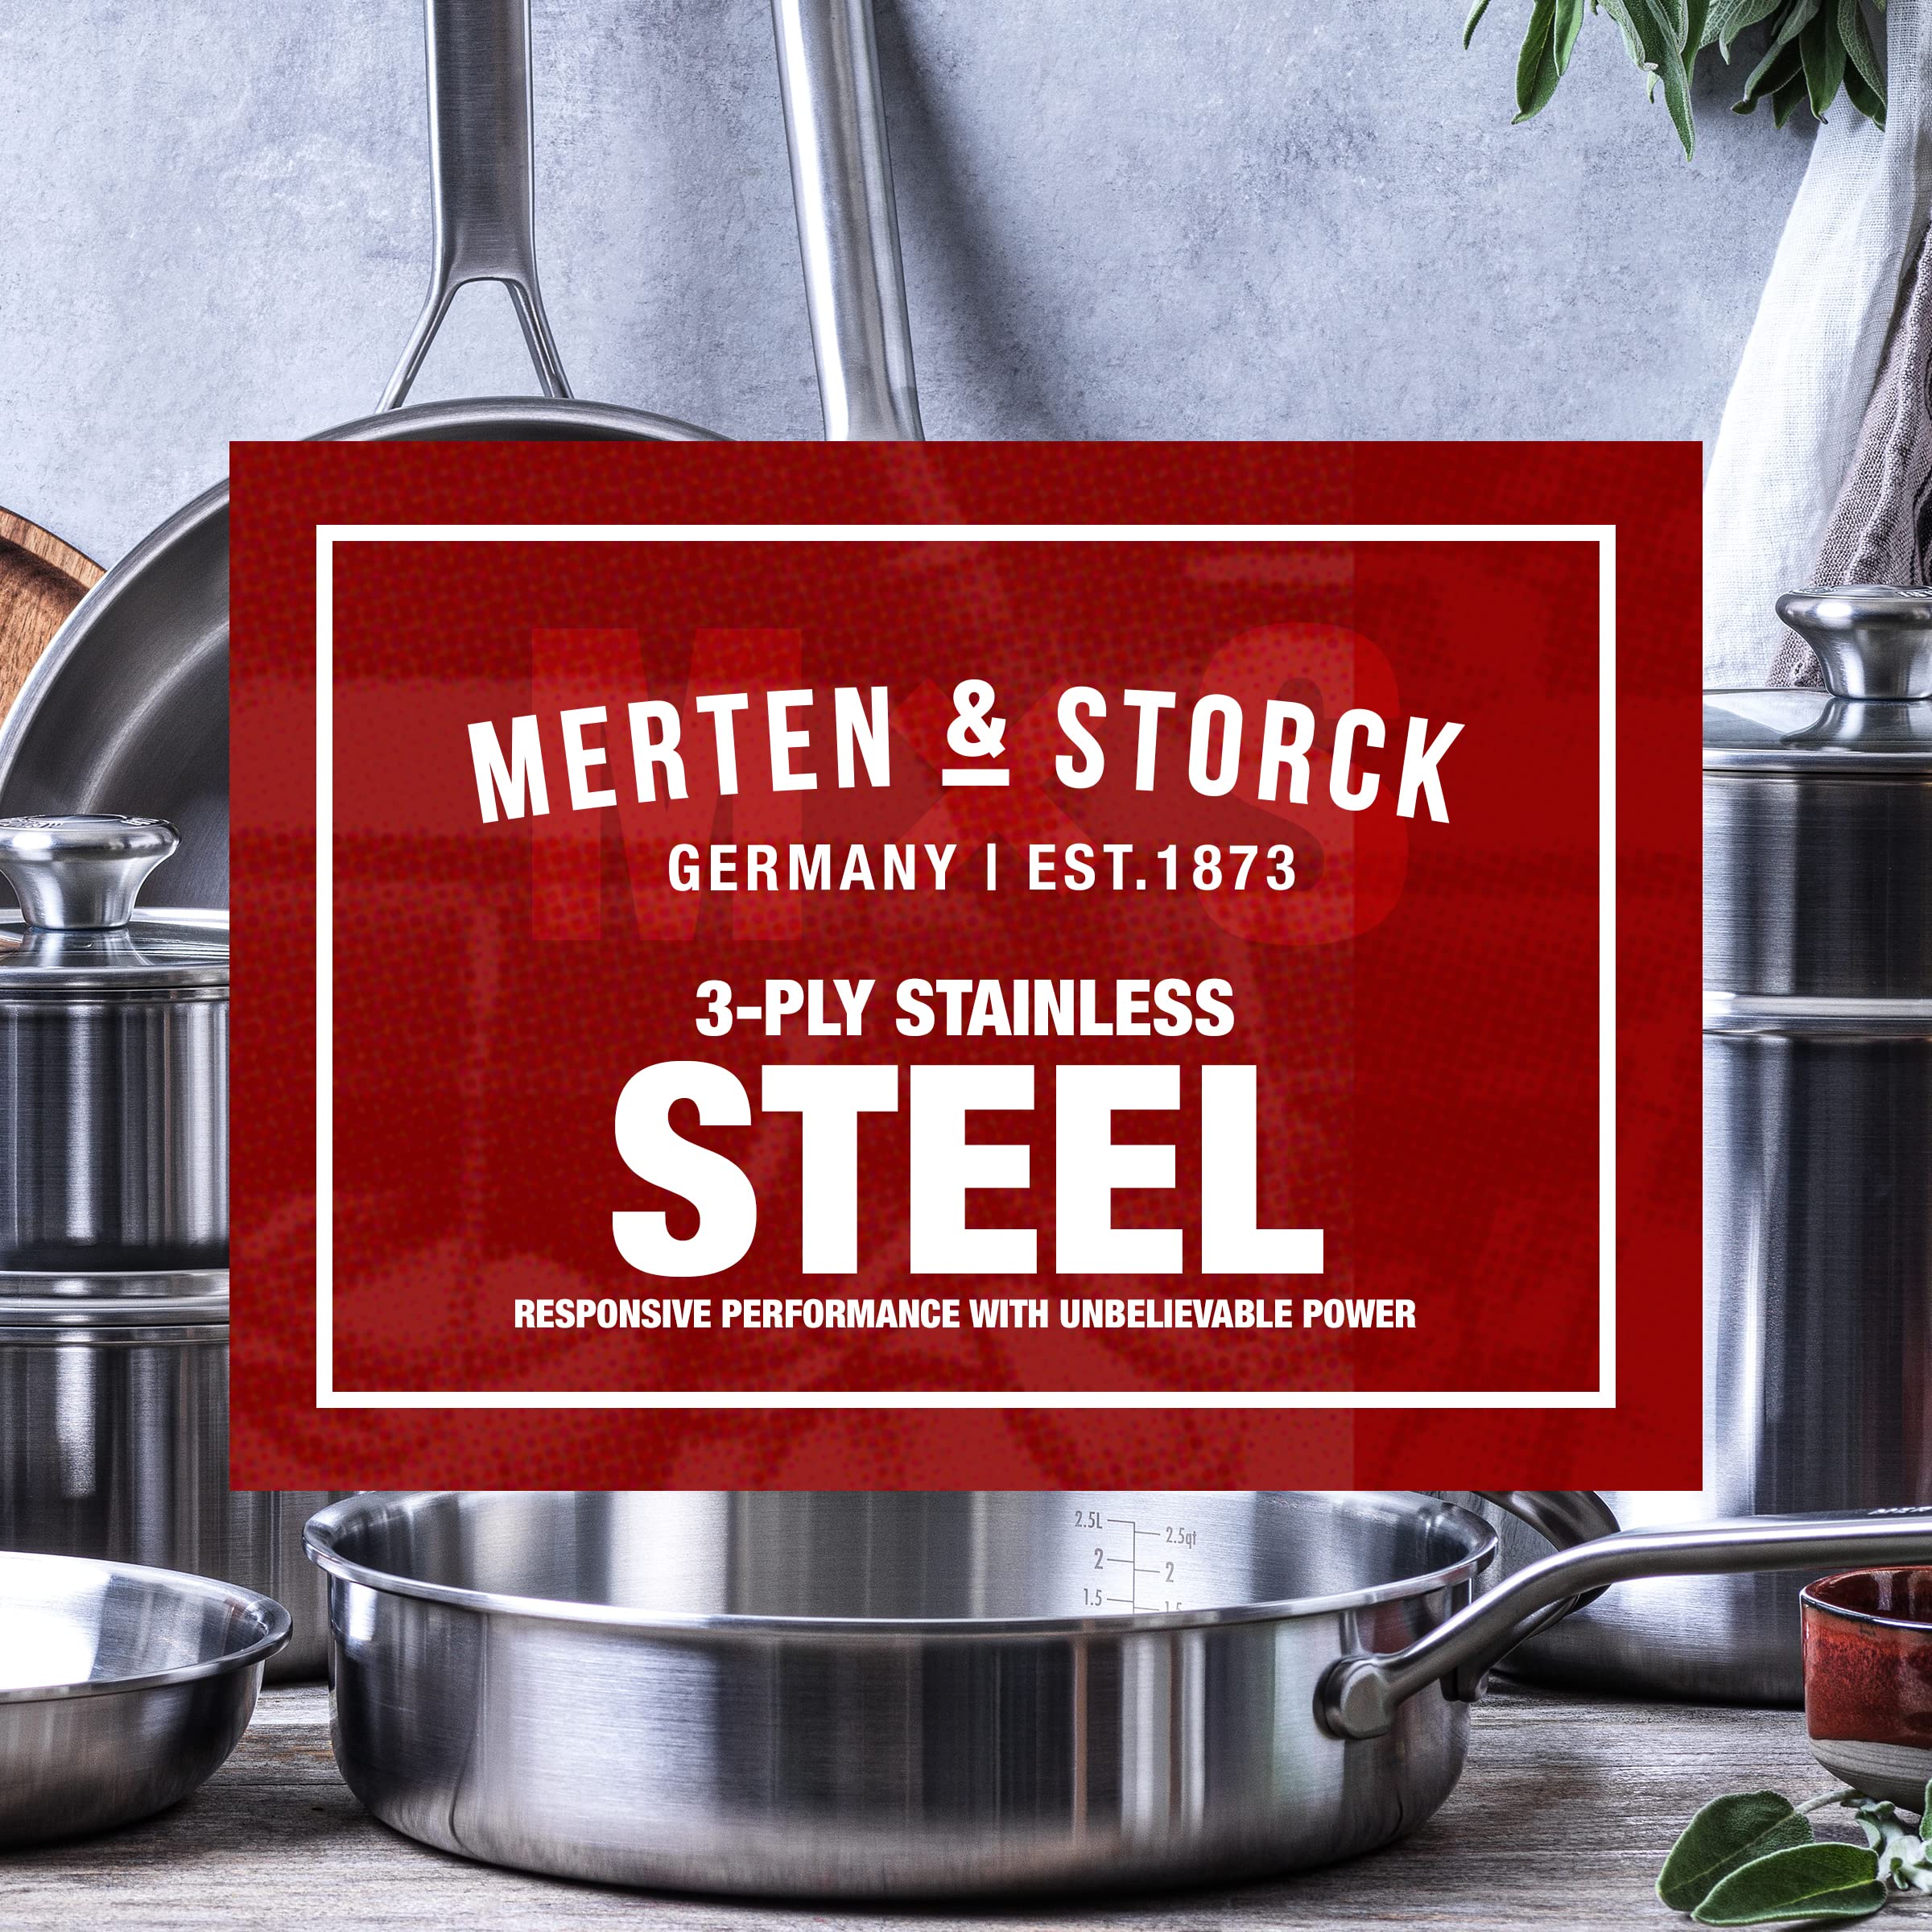 Merten & Storck Tri-Ply Stainless Steel 14 Piece Cookware Pots & Pans Set,Professional Cooking,Multi Clad,Measurement Markings,Drip-Free Pouring Edges,Durable Glass Lids,Induction,Oven&Dishwasher Safe